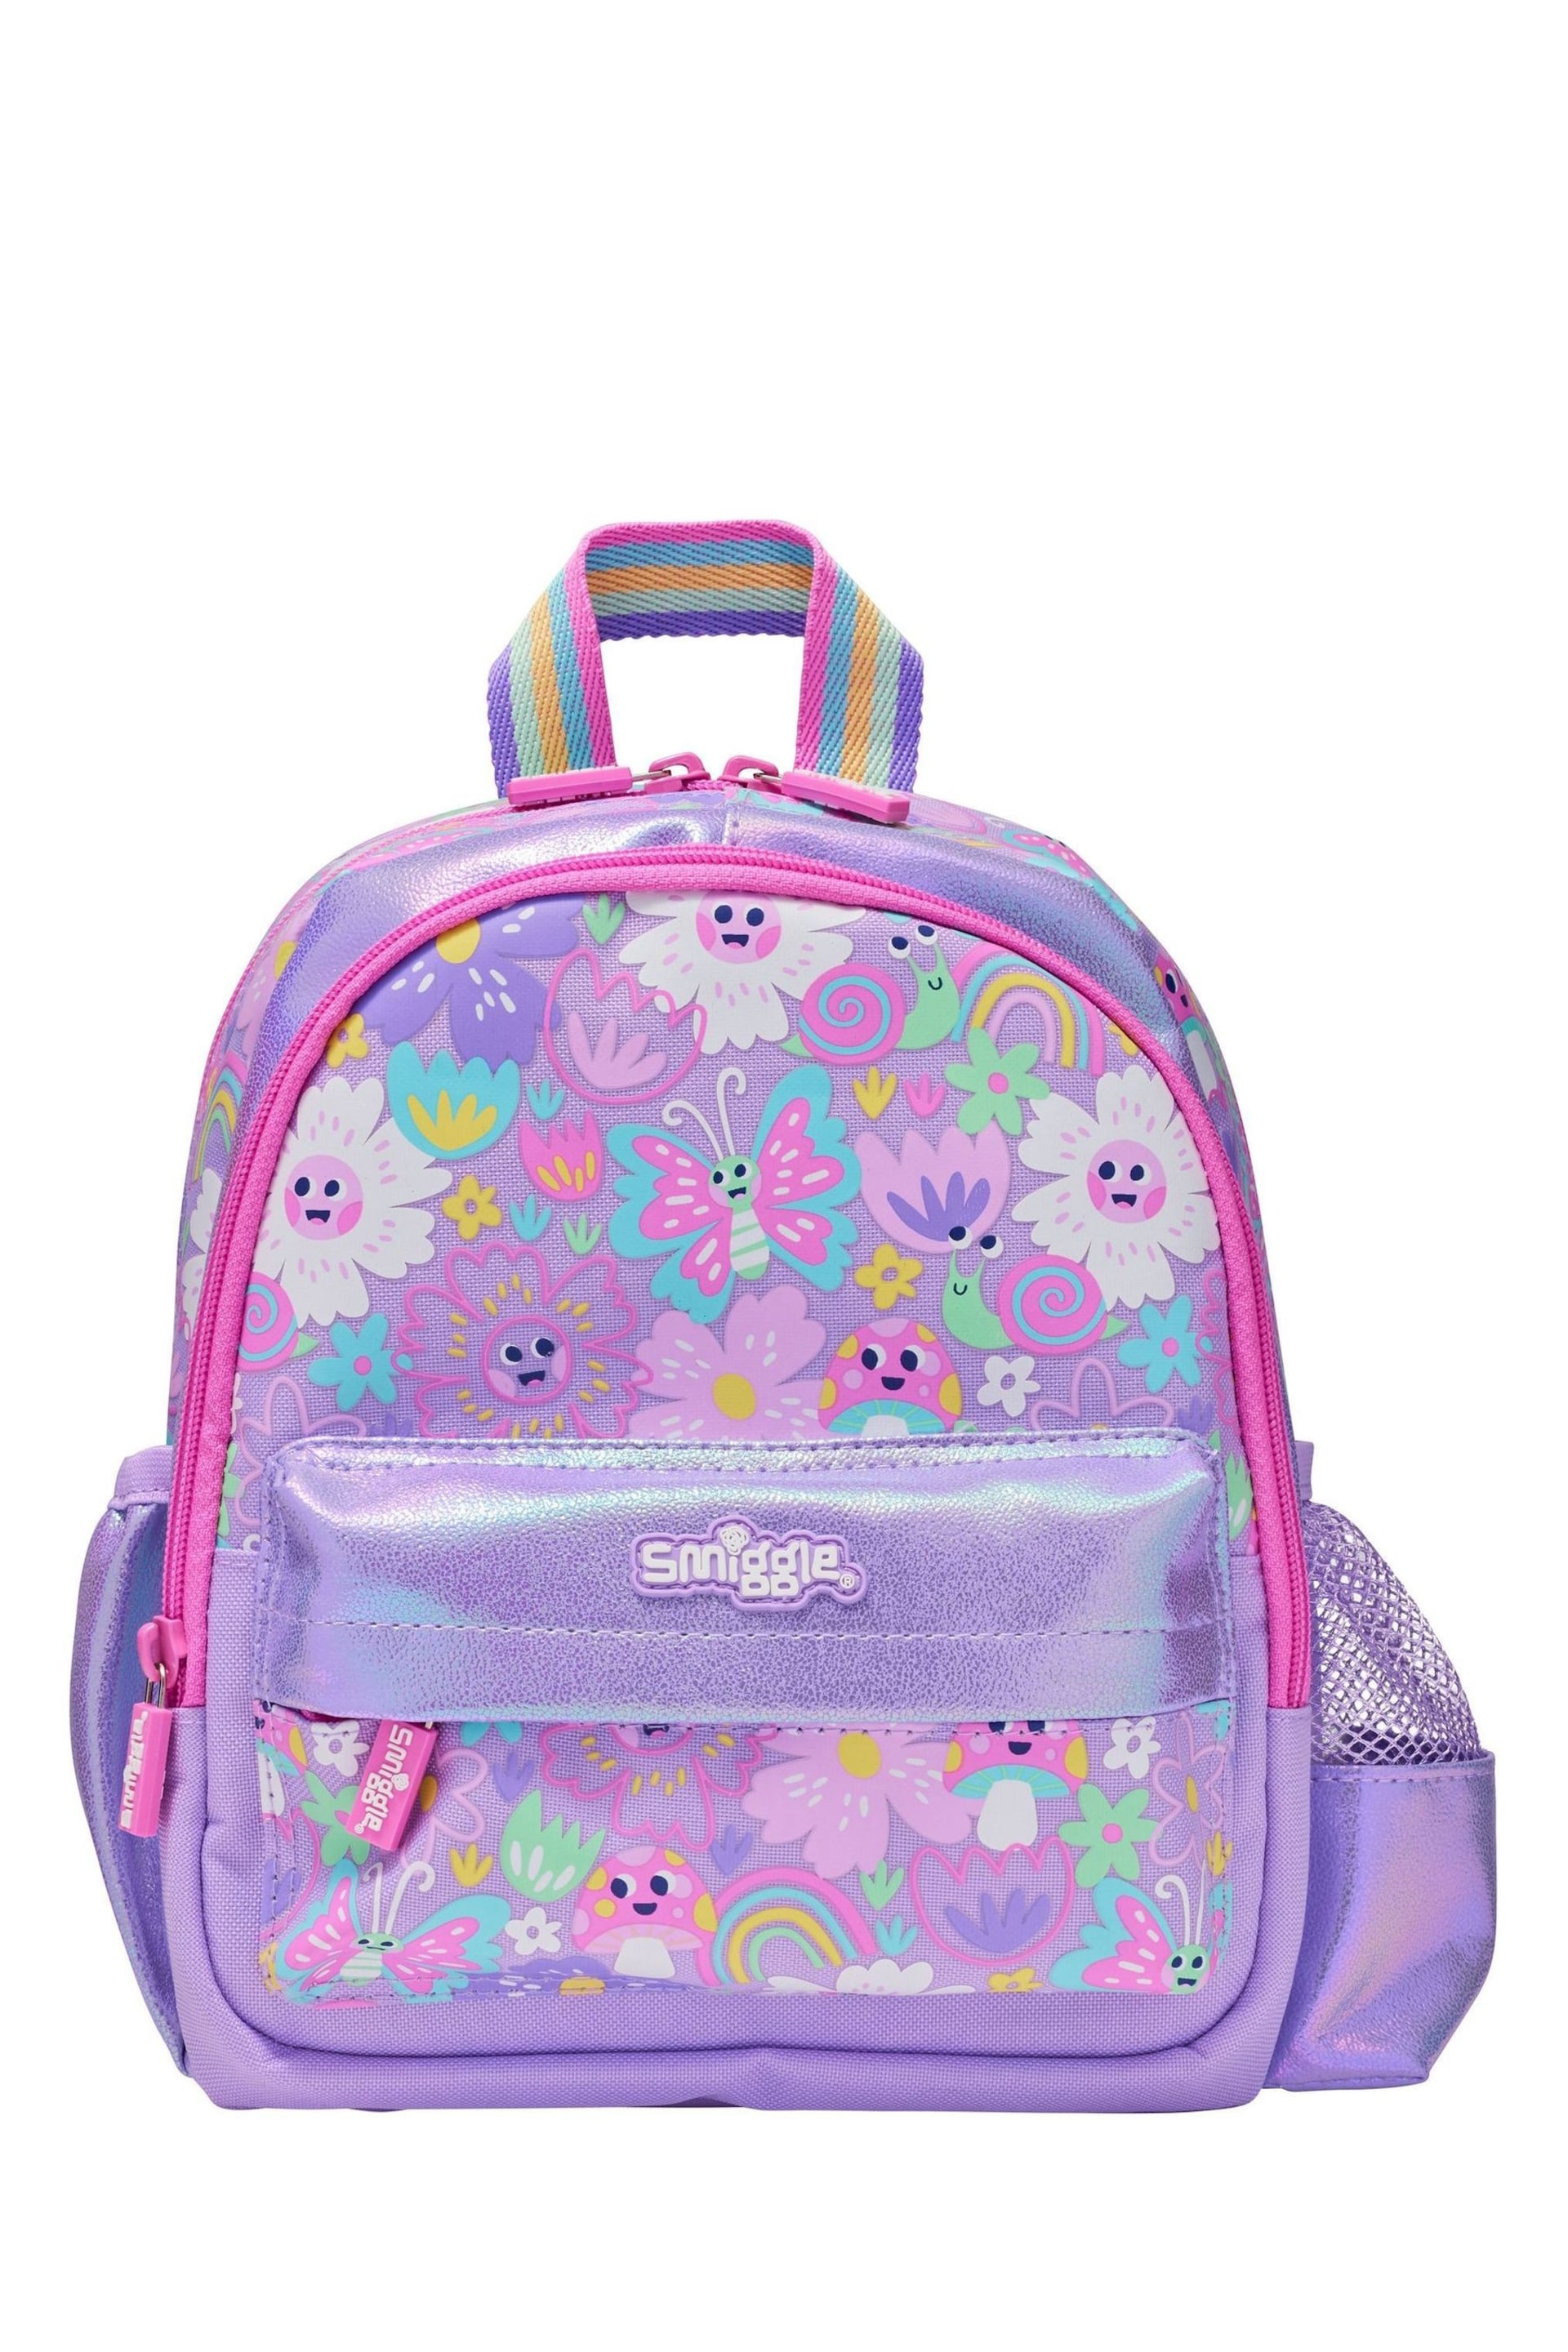 Smiggle Purple Over and Under Teeny Tiny Backpack - Image 3 of 4